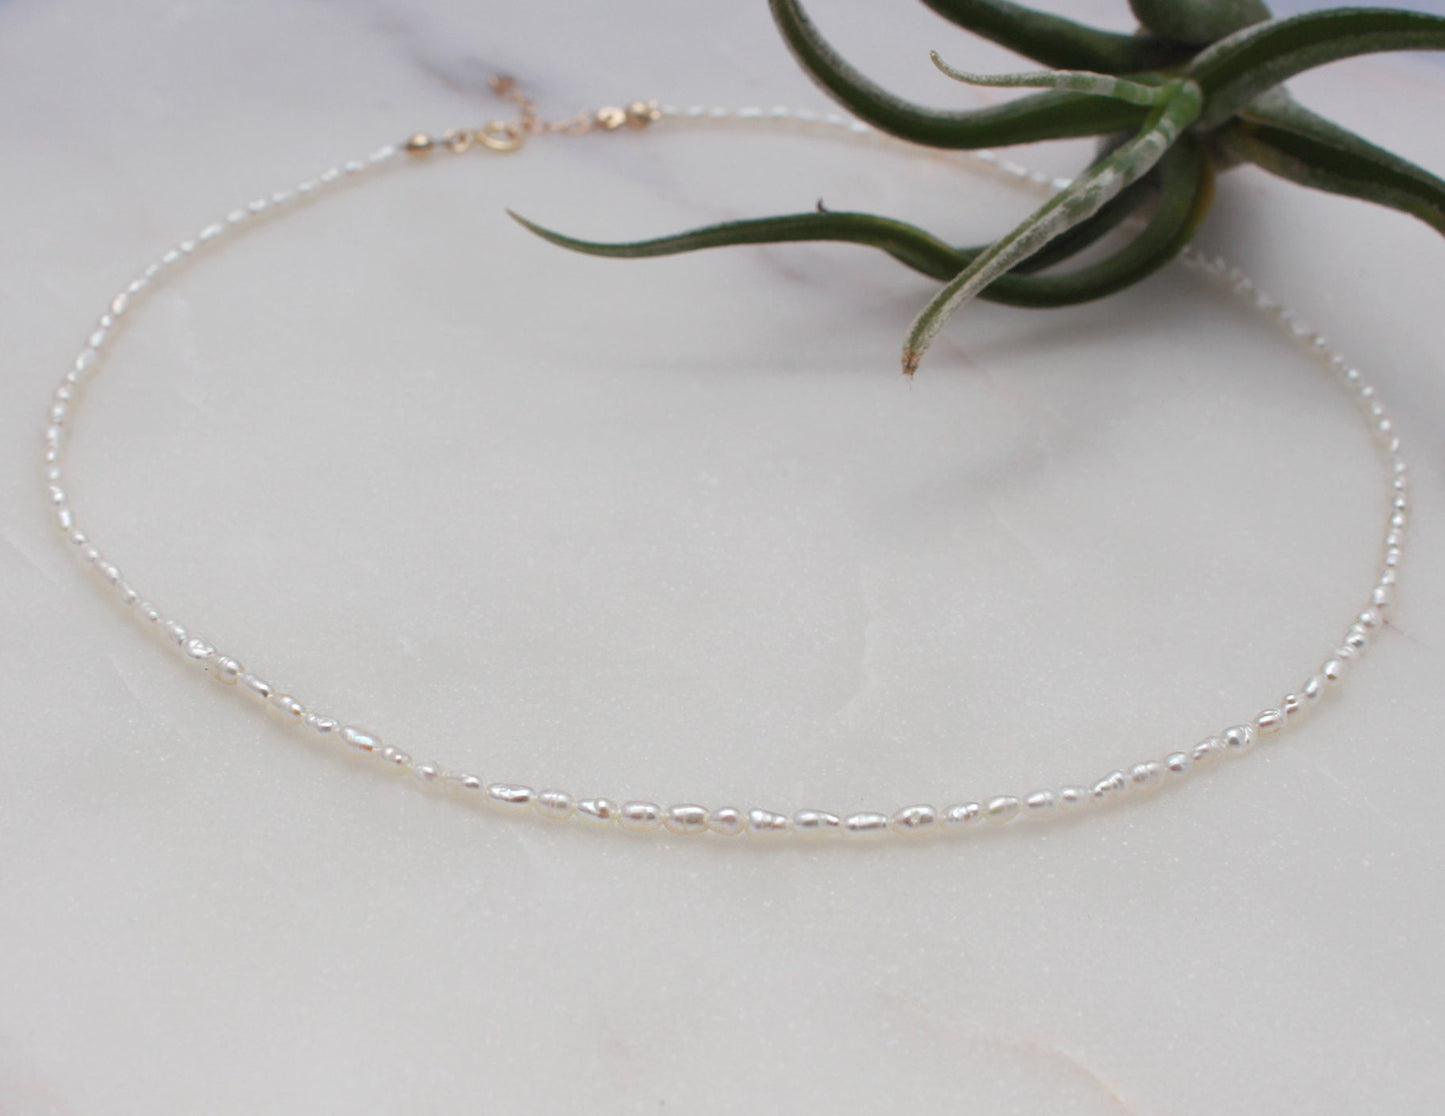 Tiny Rice Pearl Necklace - 14k Gold Filled Clasp & Extender, 2.5mm White Freshwater Rice Pearl, Seed Pearl